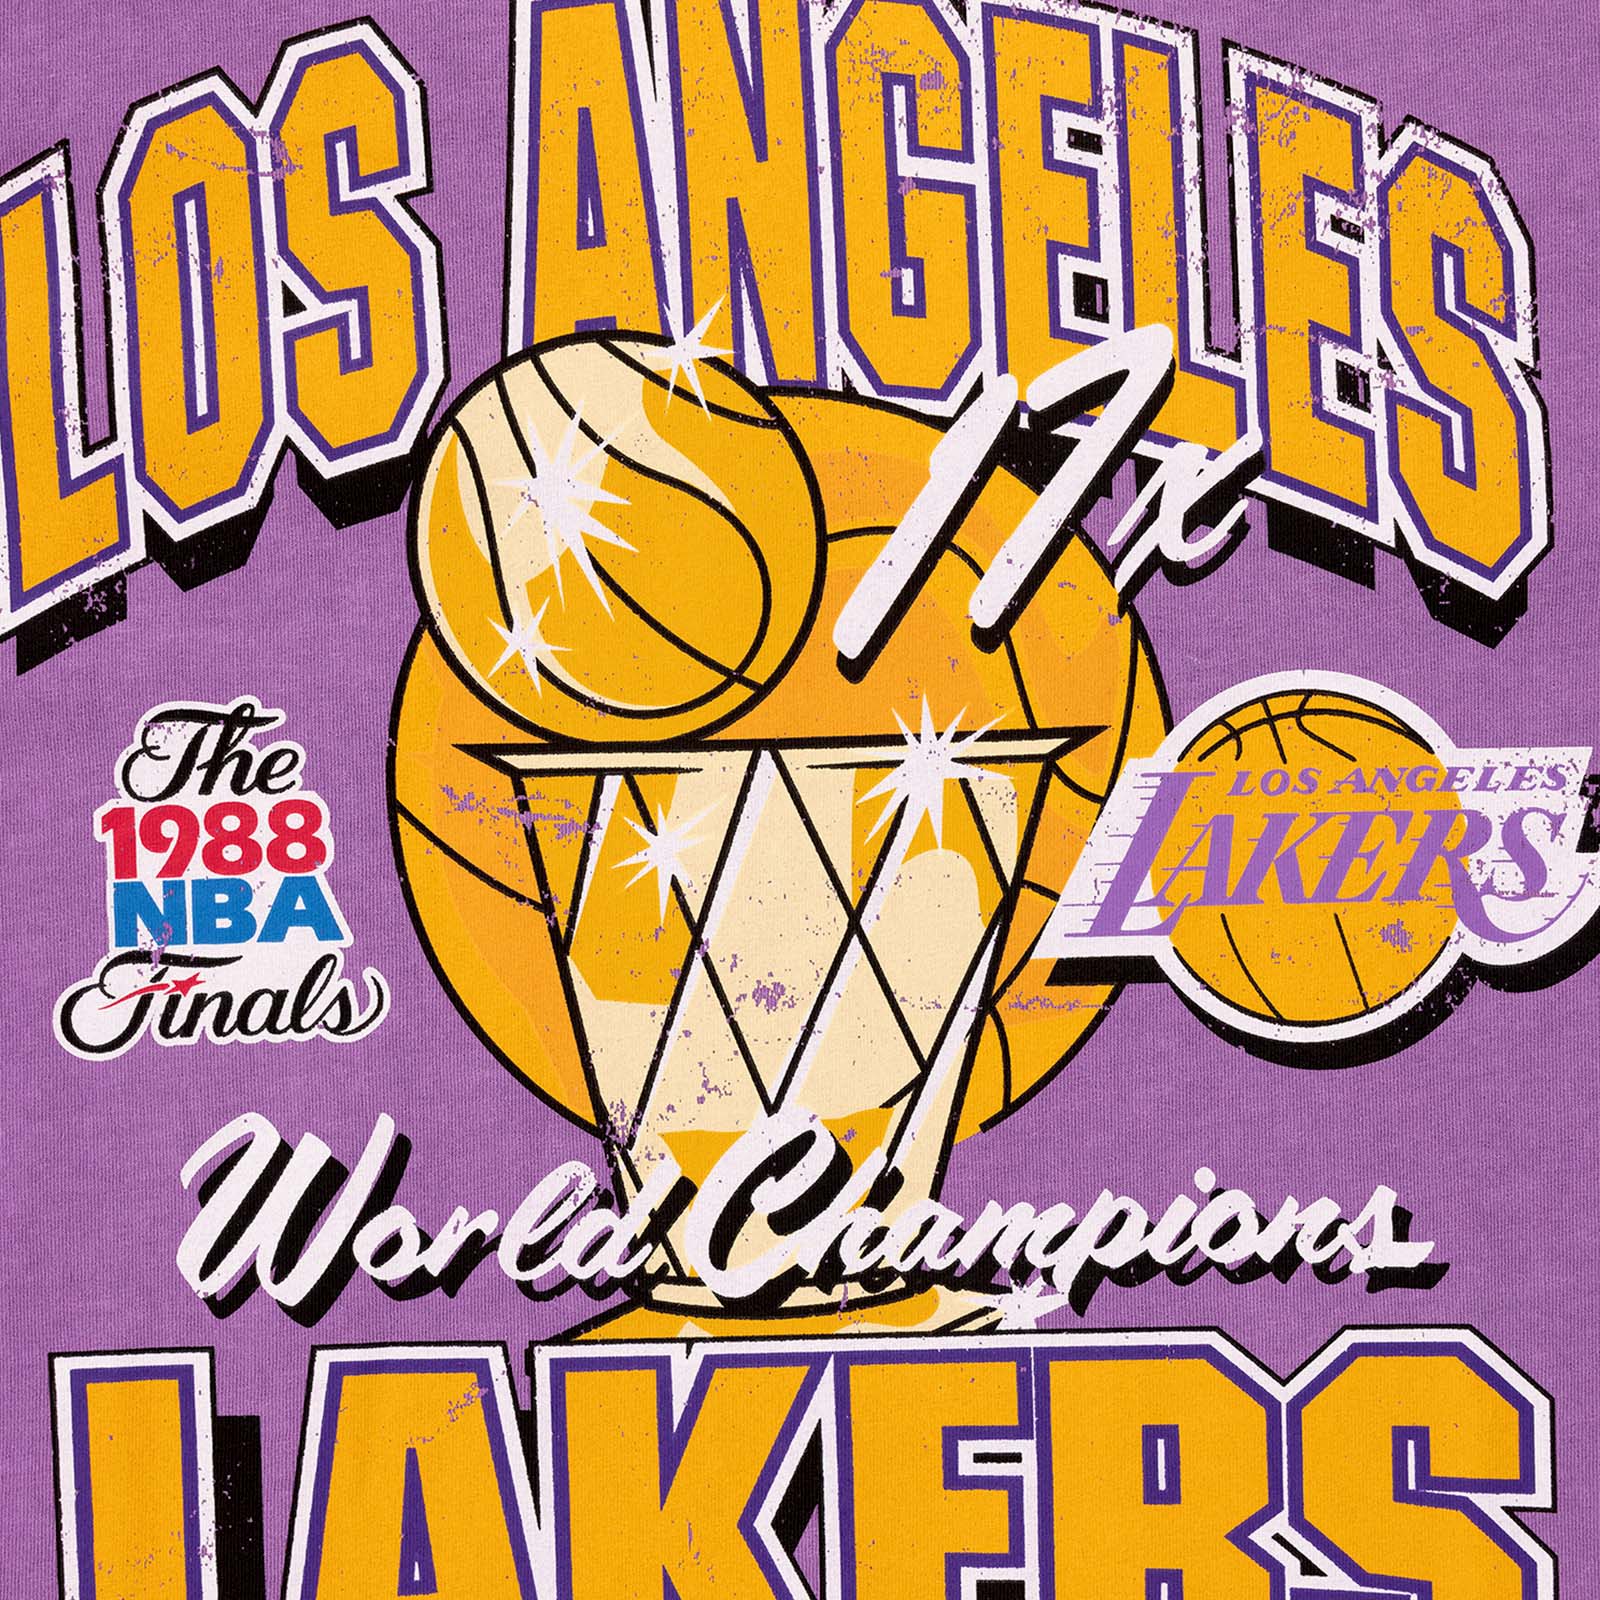 MITCHELL & NESS - CHOP vintage LA LAKERS LOGO TEE in FADED Purple